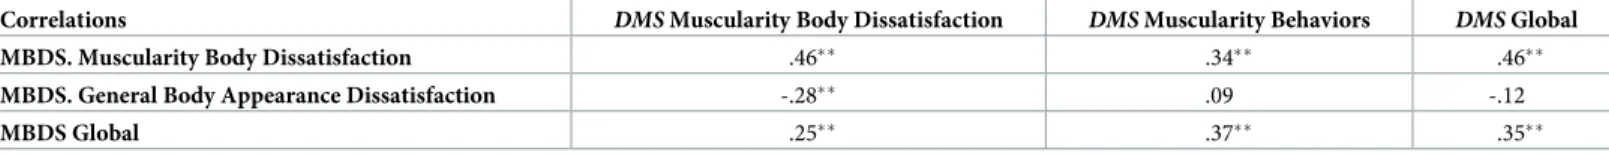 Table 4. Concurrent validity: Correlations between the DMS-FR and the subscales of the MBDS.